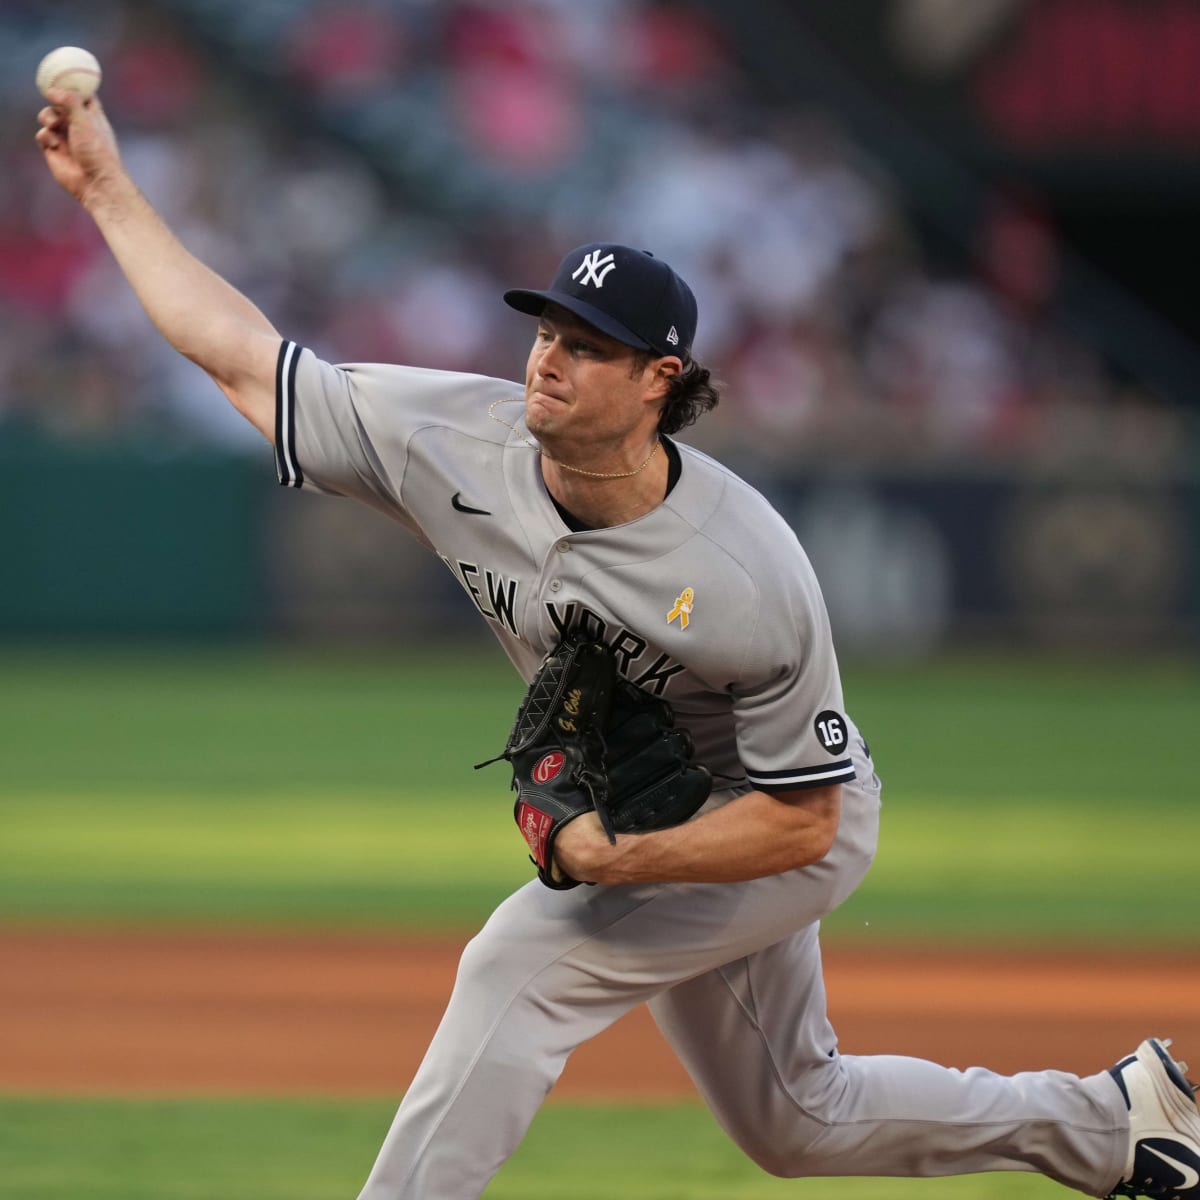 Analyzing Yankees ace Gerrit Cole's 2021 Opening Day start